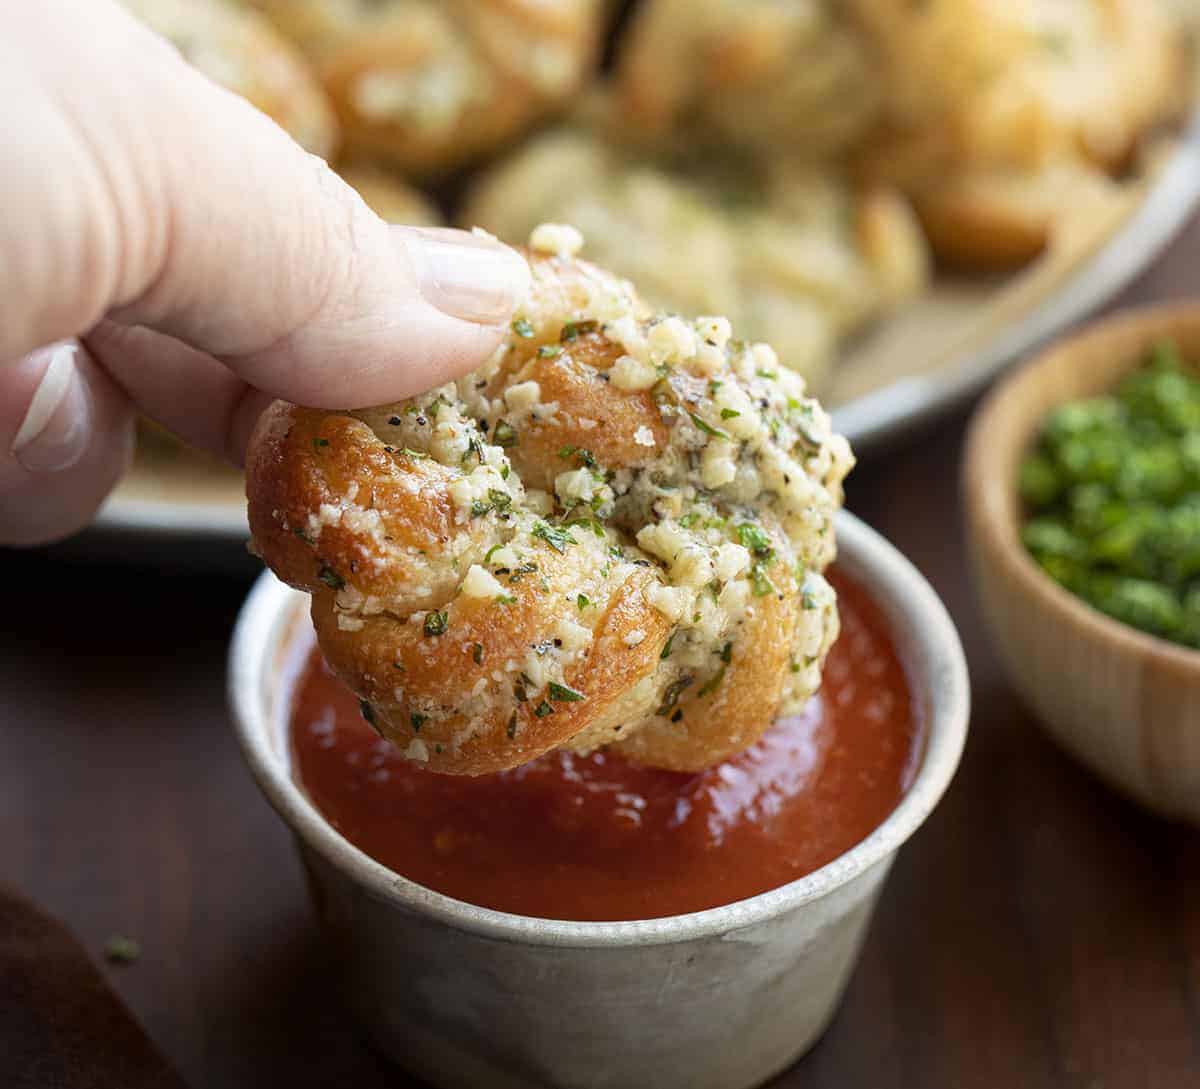 Hand Dipping Garlic Knots in Sauce